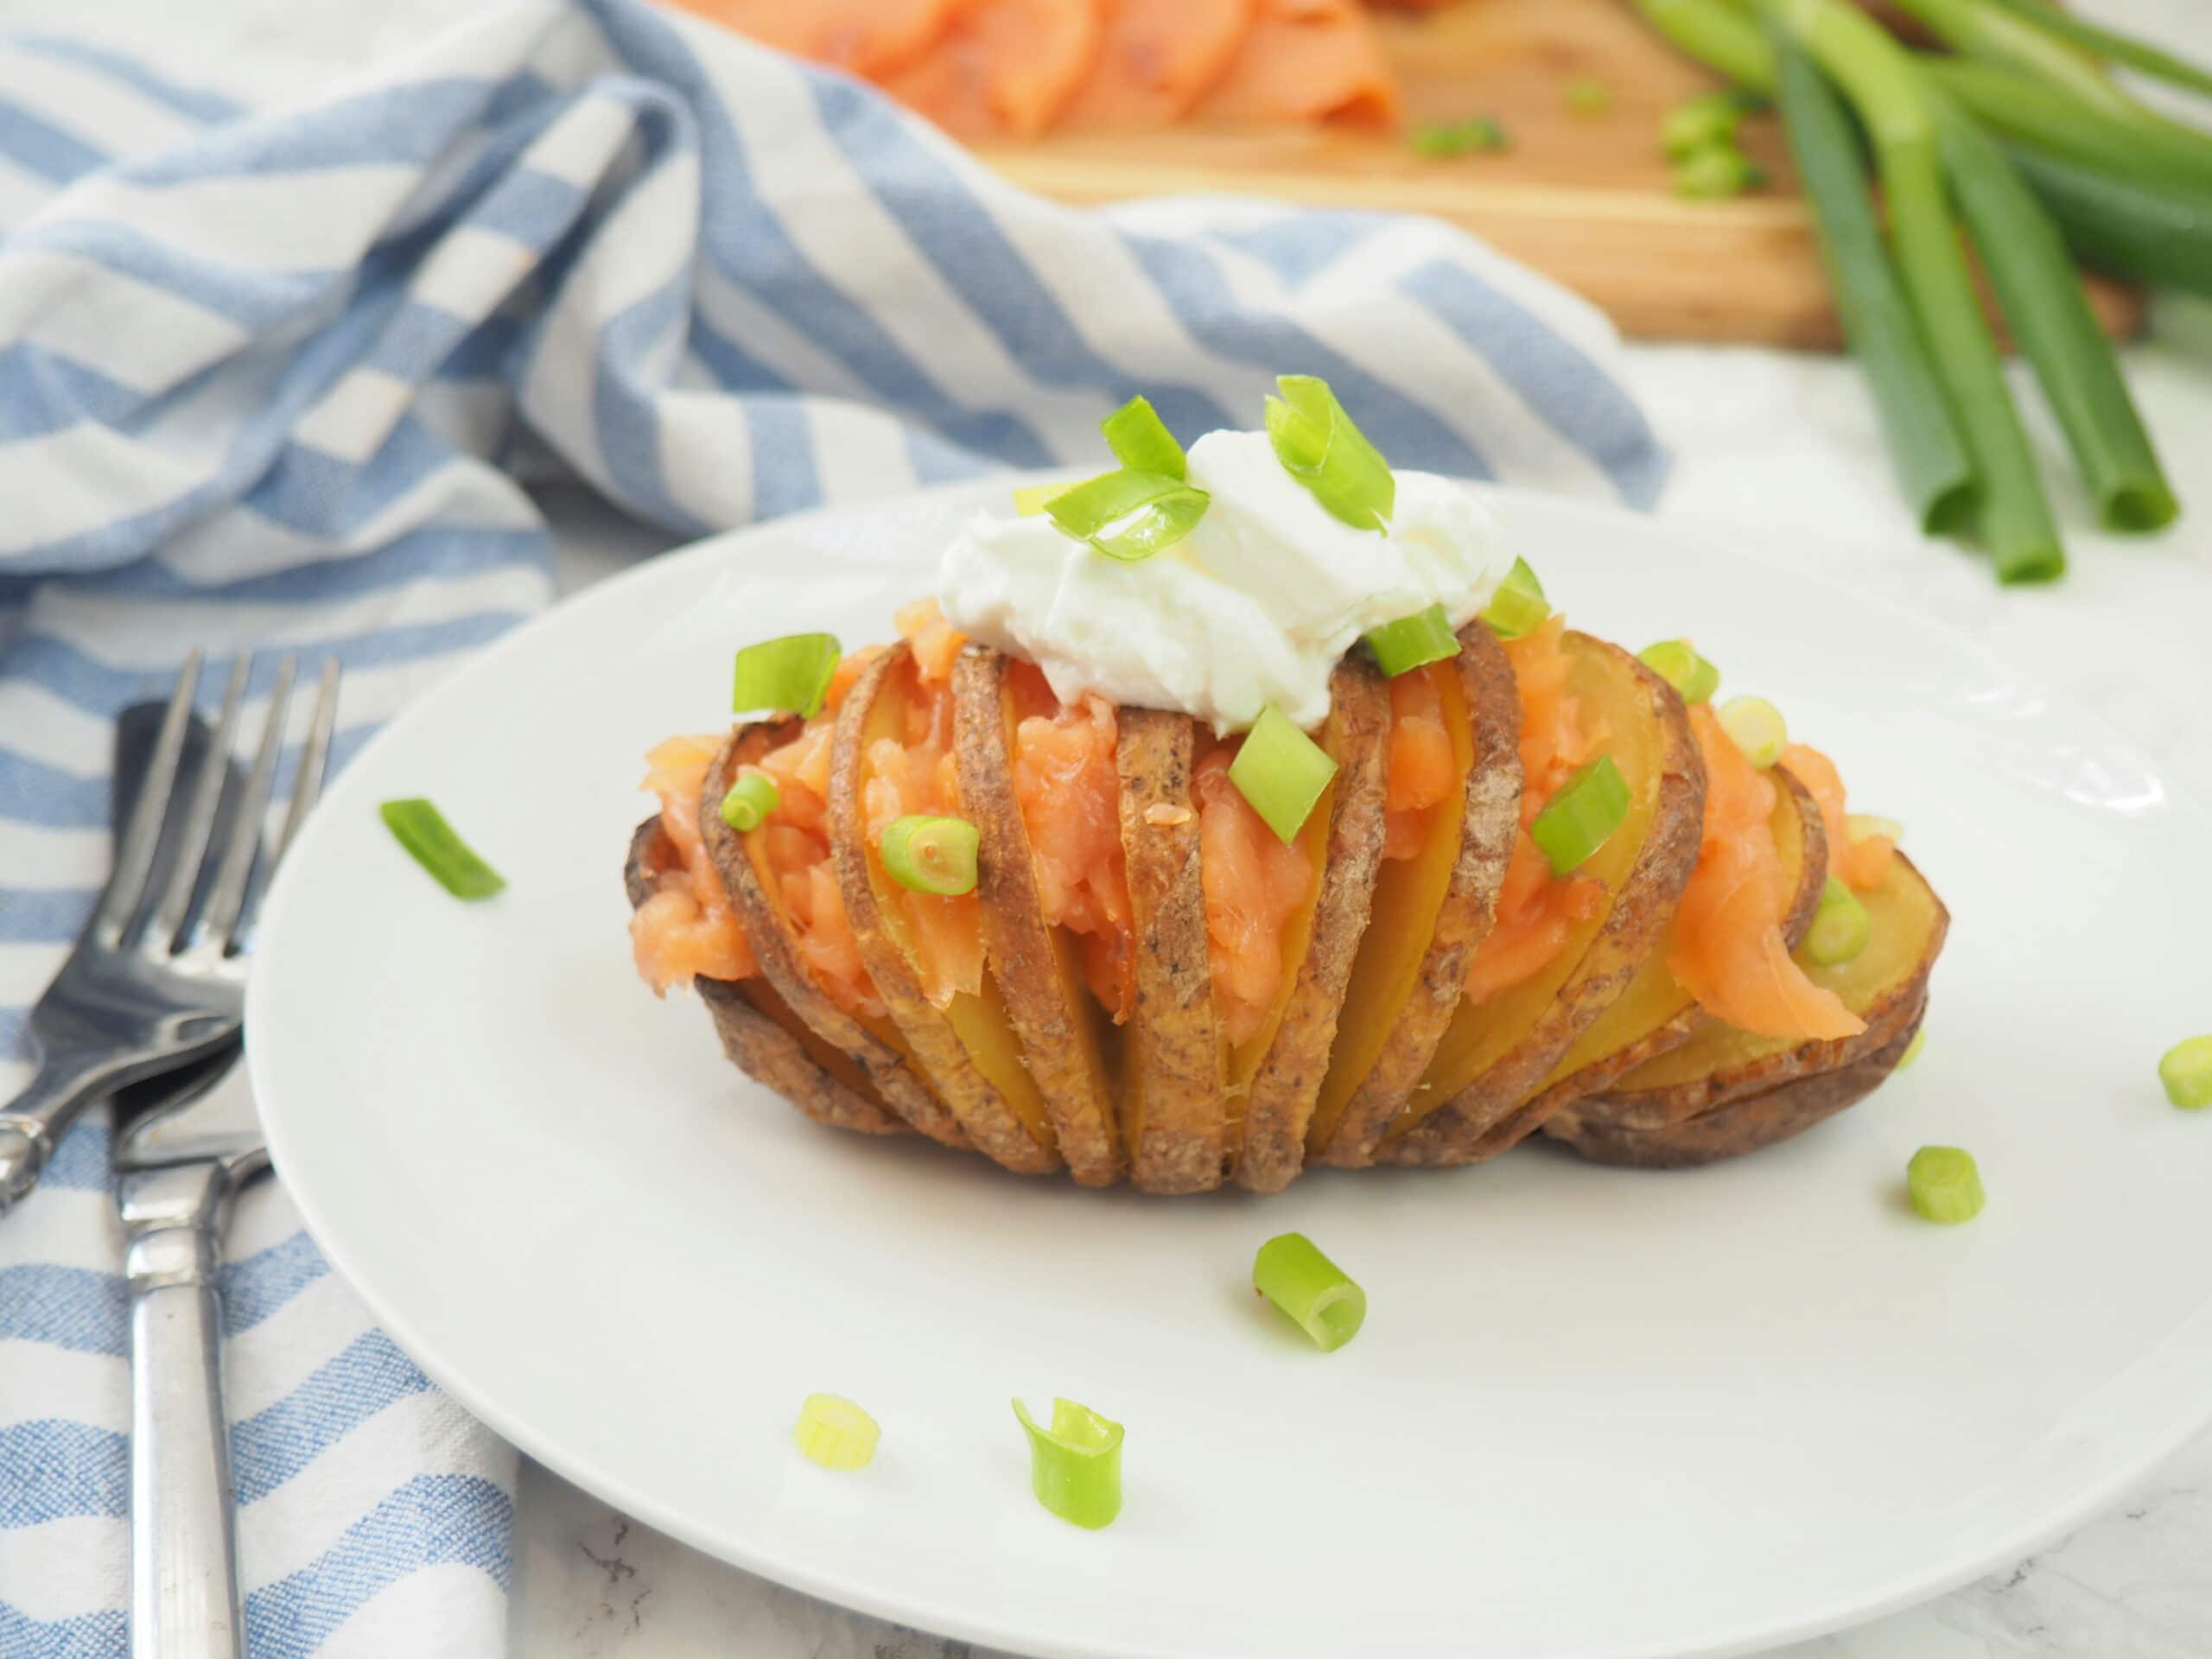 #ad This smoked salmon stuffed Hasselback potato is delicious any time of day--brunch, lunch or dinner! It's nutrient composition of complex carbs, protein, and potassium also makes it ideal for refueling after a workout. Give this nordic-inspired potato a try today! #gluten-free